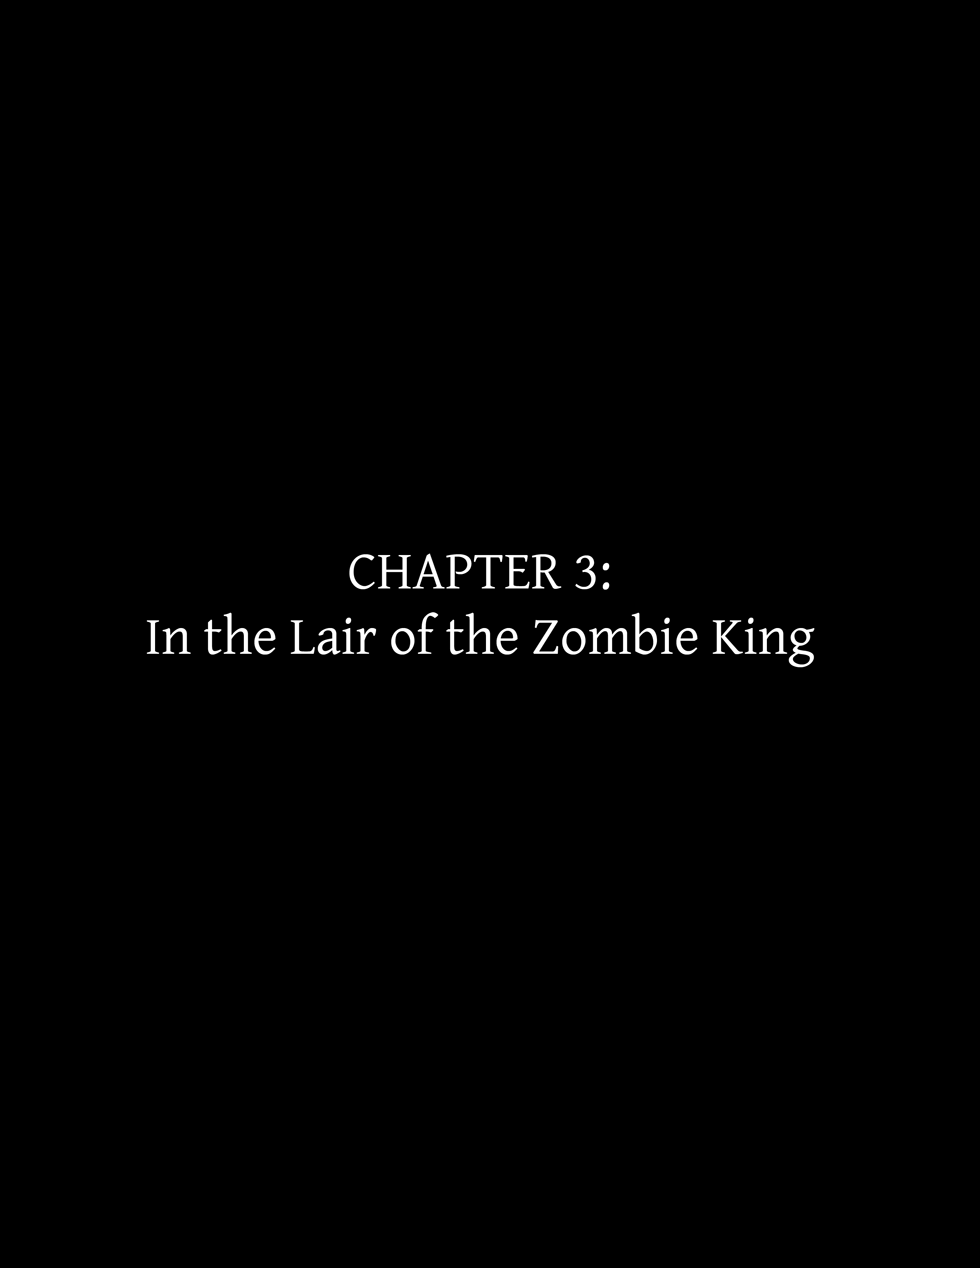 Chapter 3: In the Lair of the Zombie King